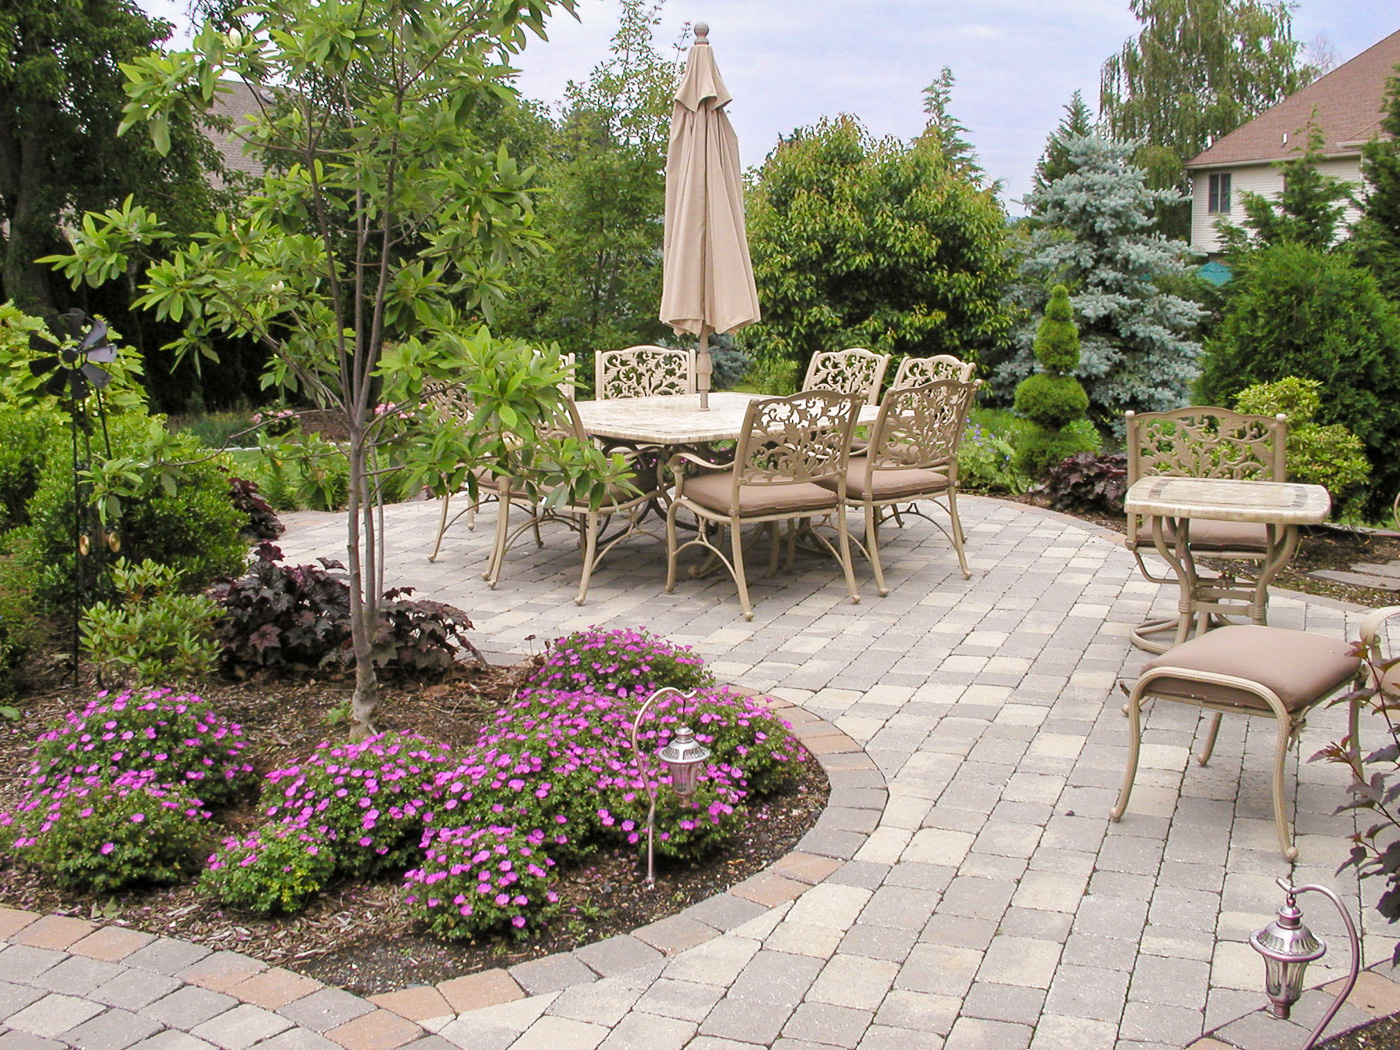 Hardscape and plantings creating outdoor living dining niche destination